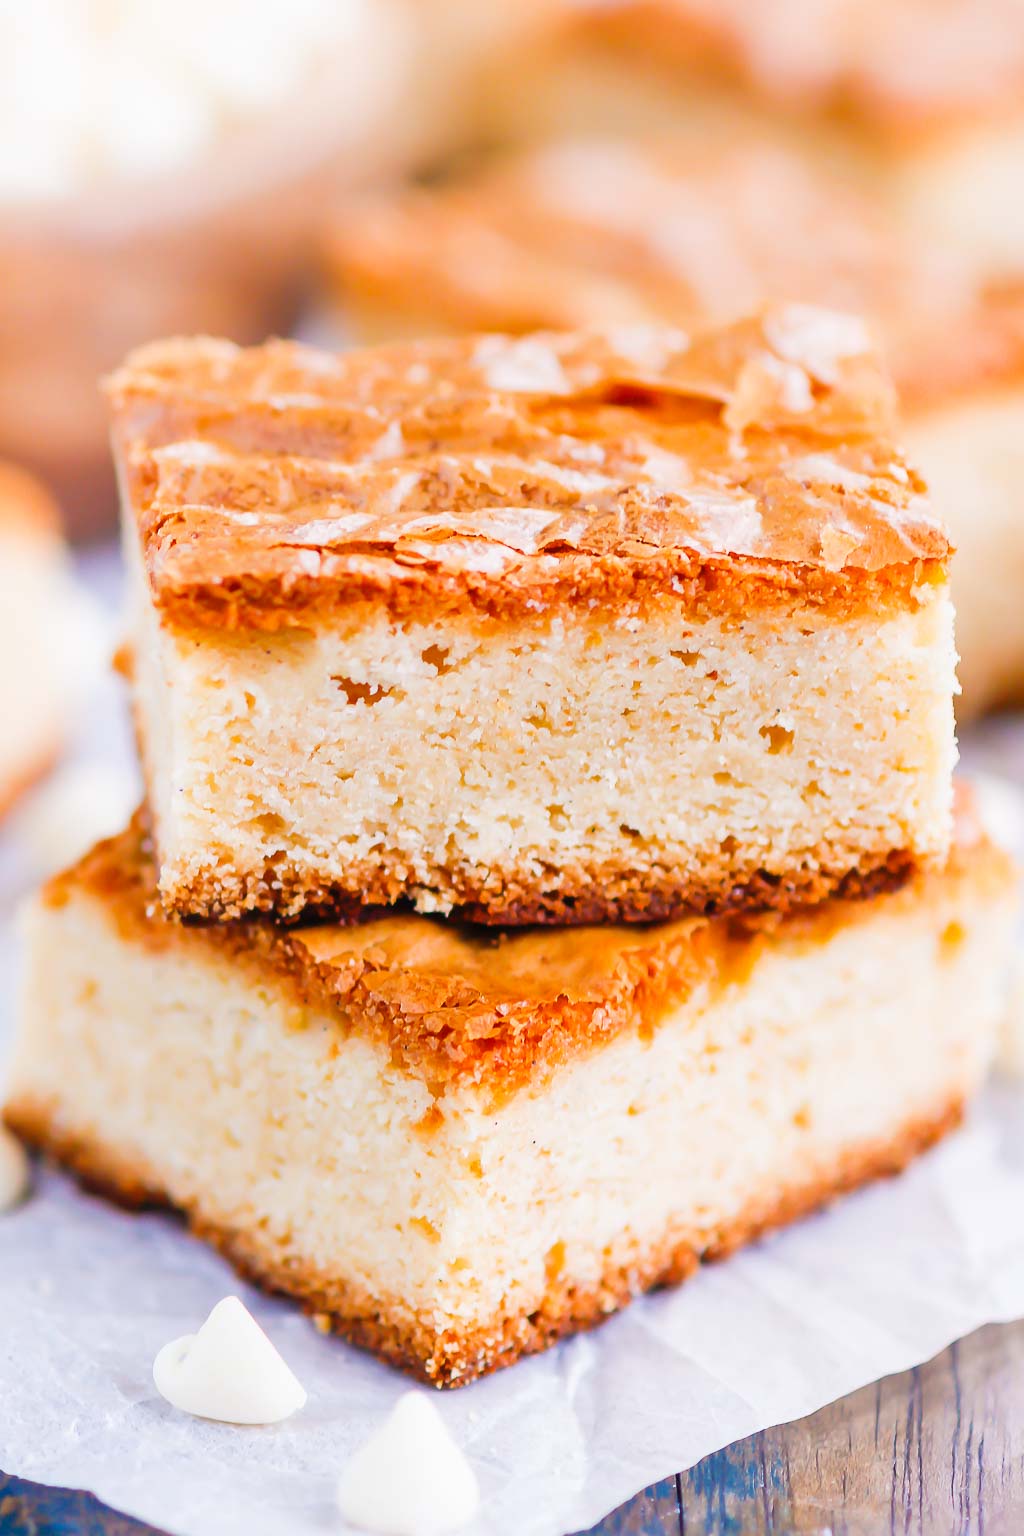 This White Chocolate Blondies Recipe combines the elegance of white chocolate with rich vanilla to bring you a delightfully sweet treat that is ready for the oven in minutes and baked in just half an hour.  Serve this recipe with a hot cup of coffee for the perfect treat on a cold day! #blondies #whitechocolate #whitechocolateblondies #blondierecipe #whitechocolatedessert #dessert #easydessert